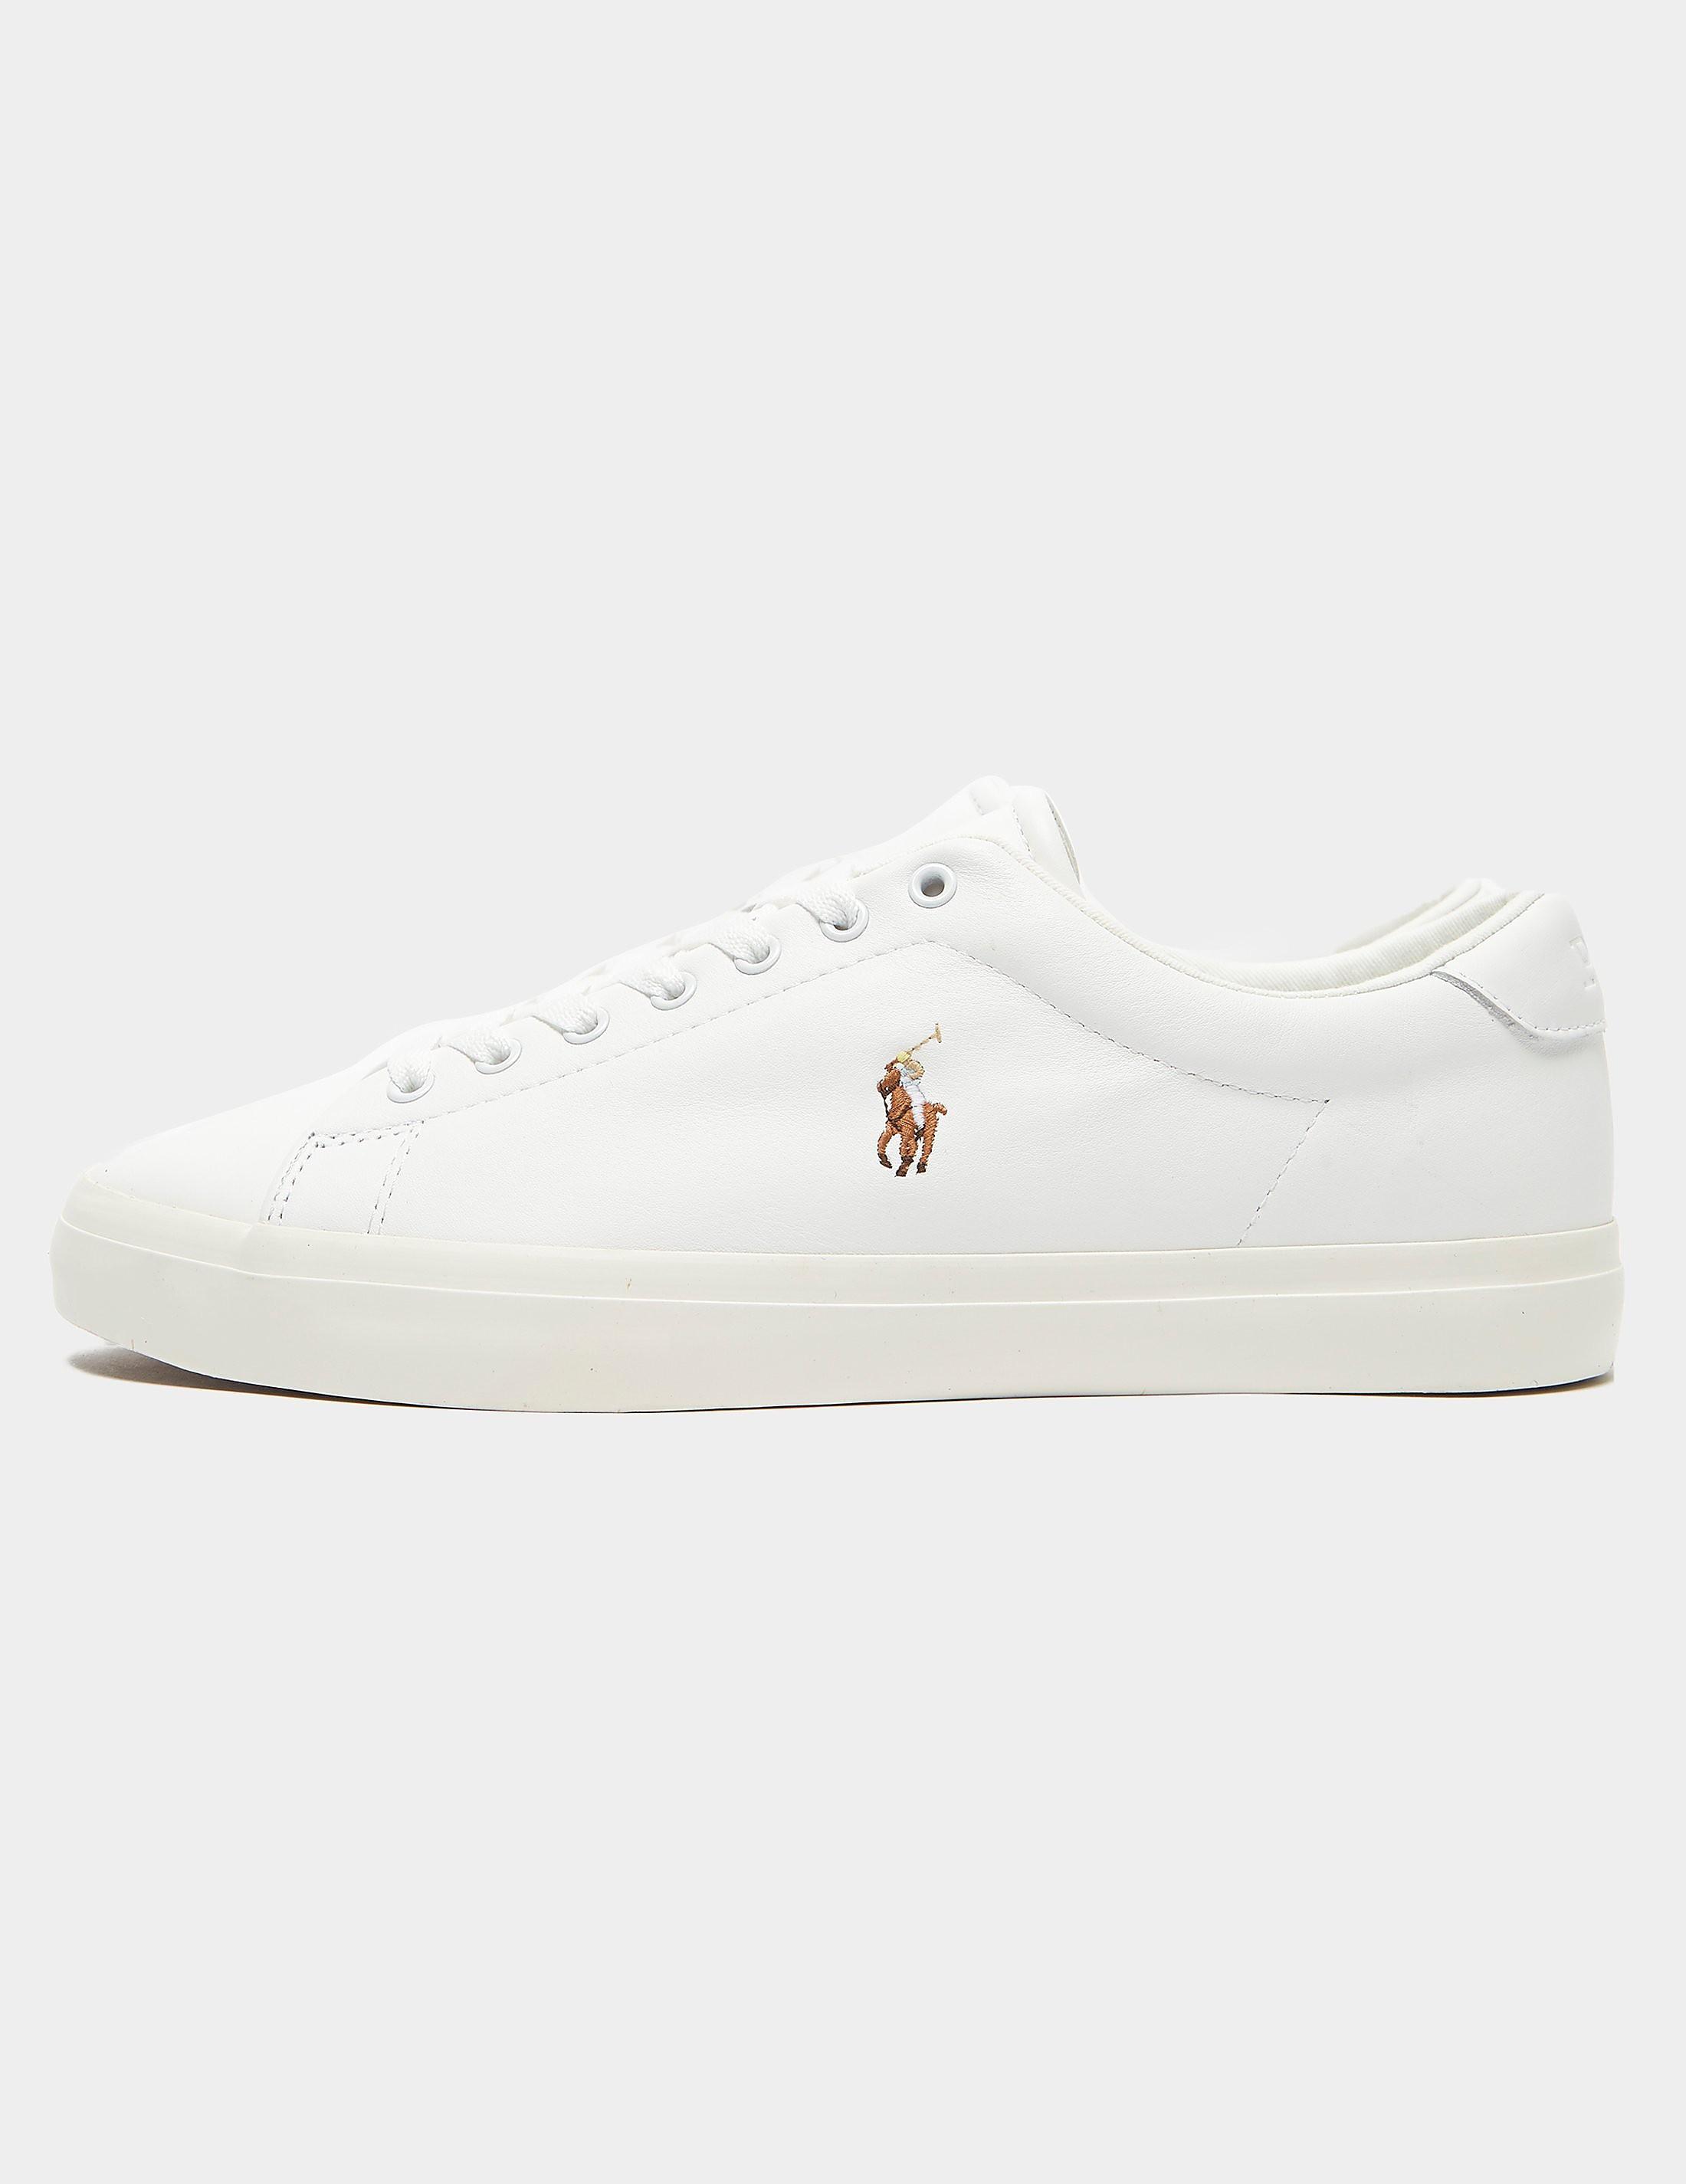 Polo Ralph Lauren Leather Longwood Trainers in White for Men - Lyst